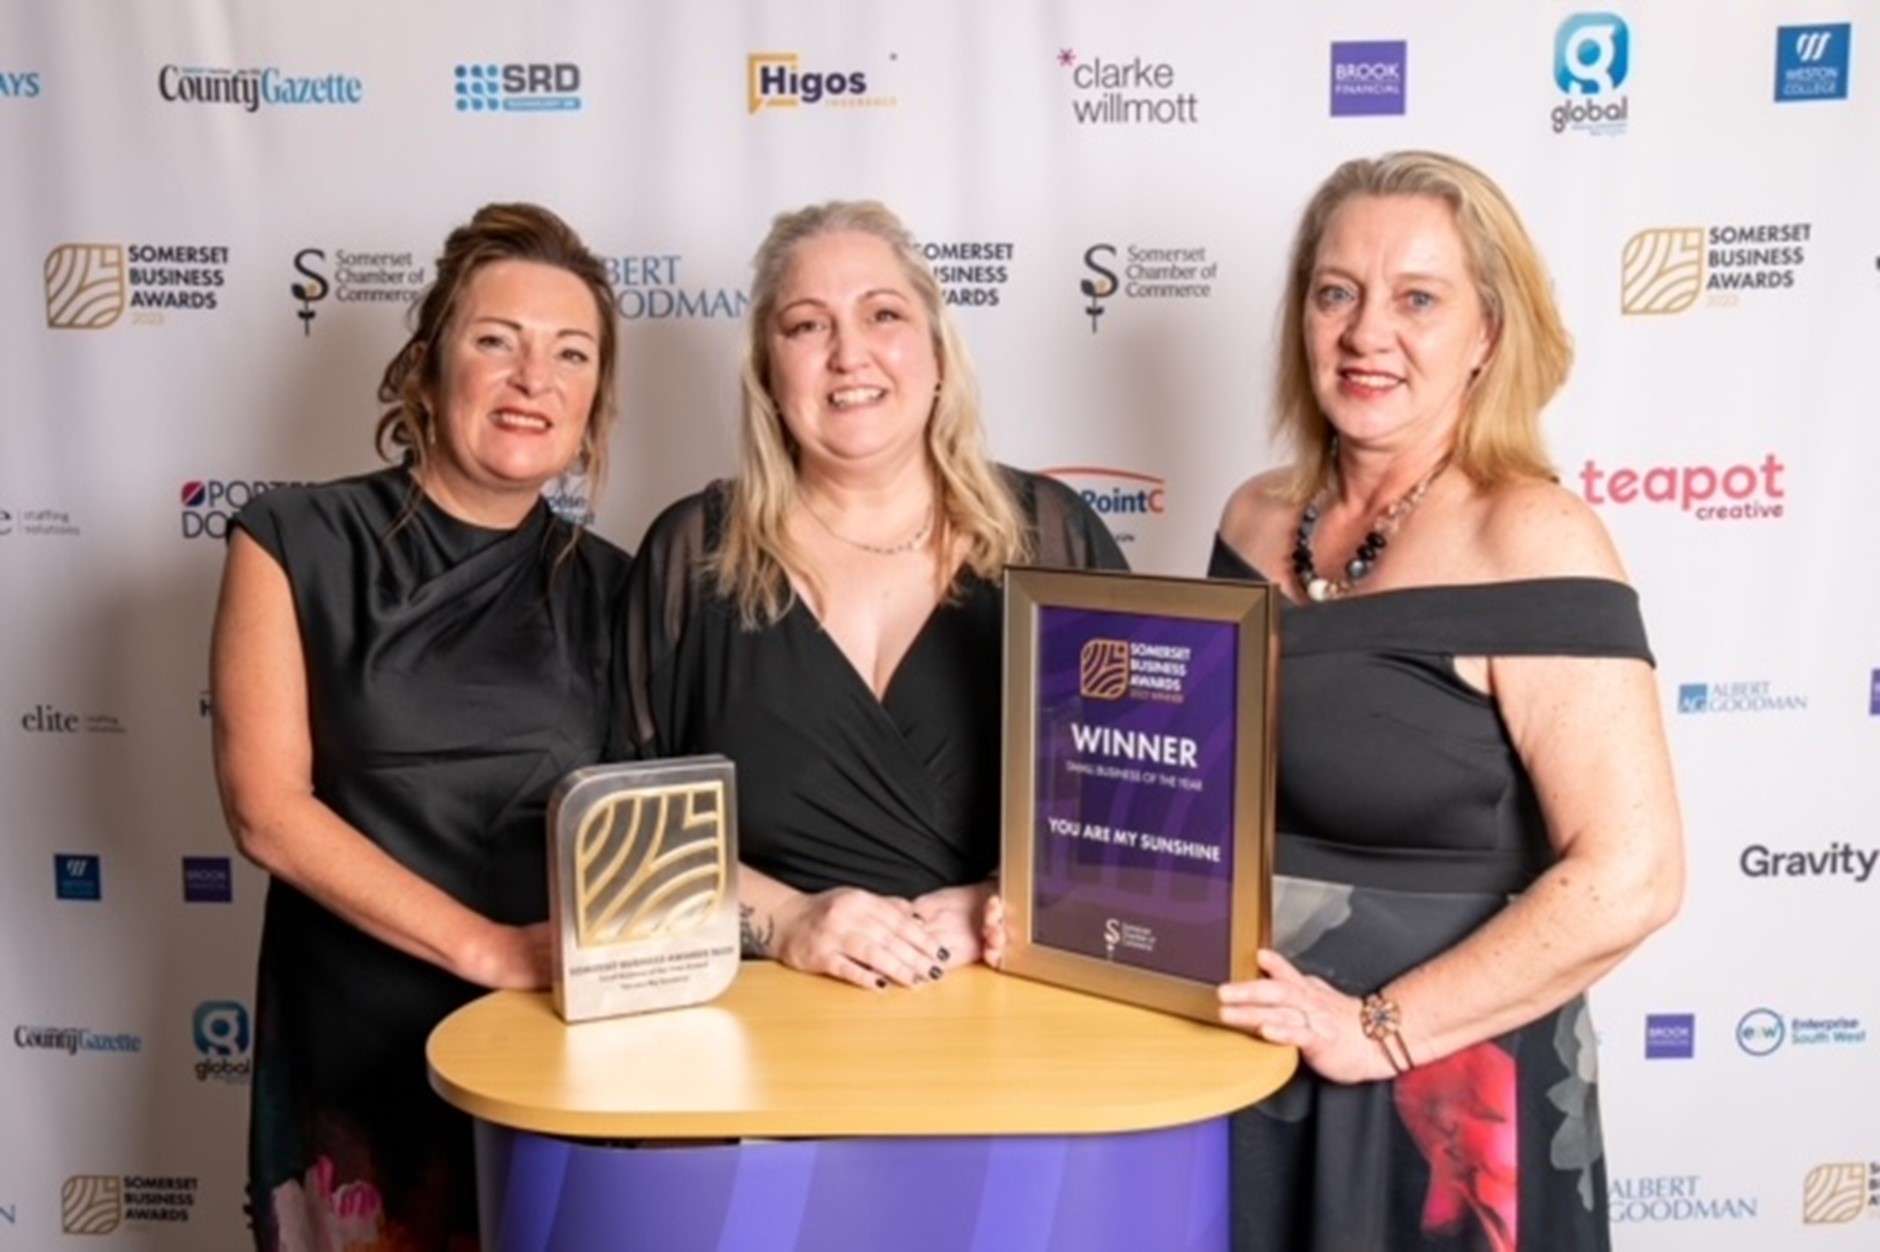 Three women around a podium with awards for Small Business of the Year